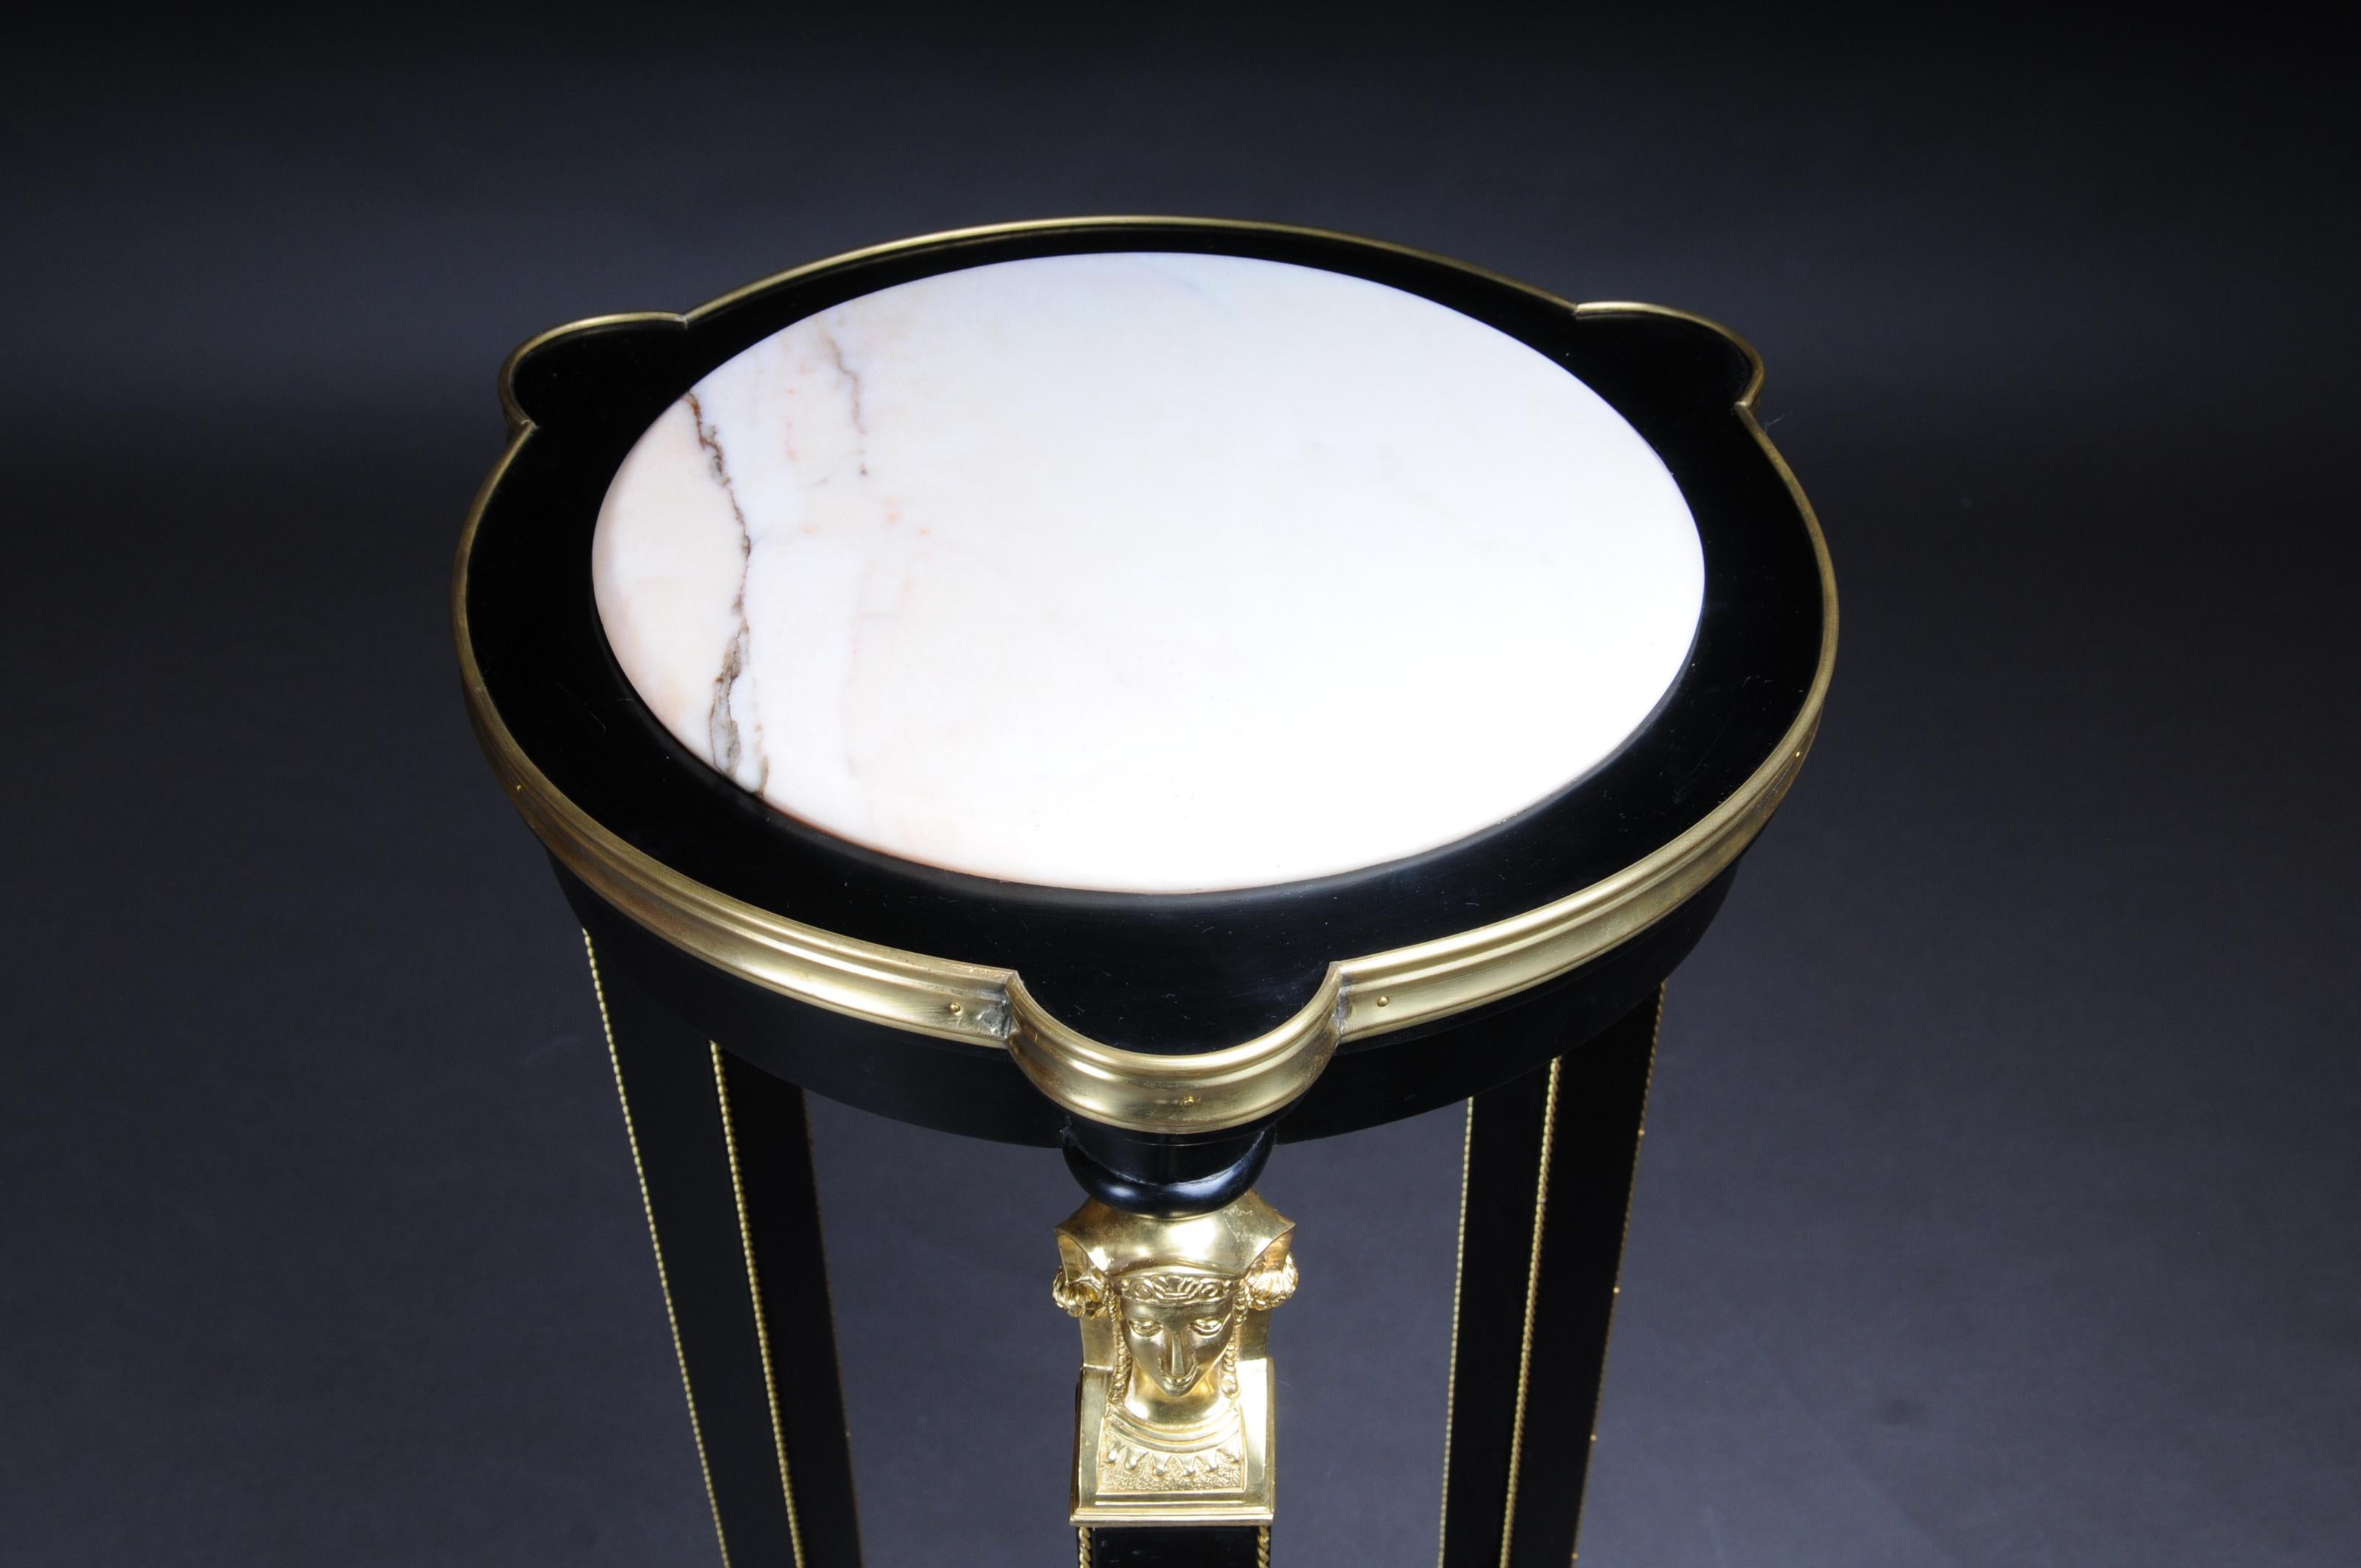 Classic Ebonized Karyadite Pillar / Pedestal in Empire Style, black gold

Piano black polished veneer on solid wood. Round body with marble slab on Karyadites with tapering square legs in sabots ending on three sided recessed base plate. The